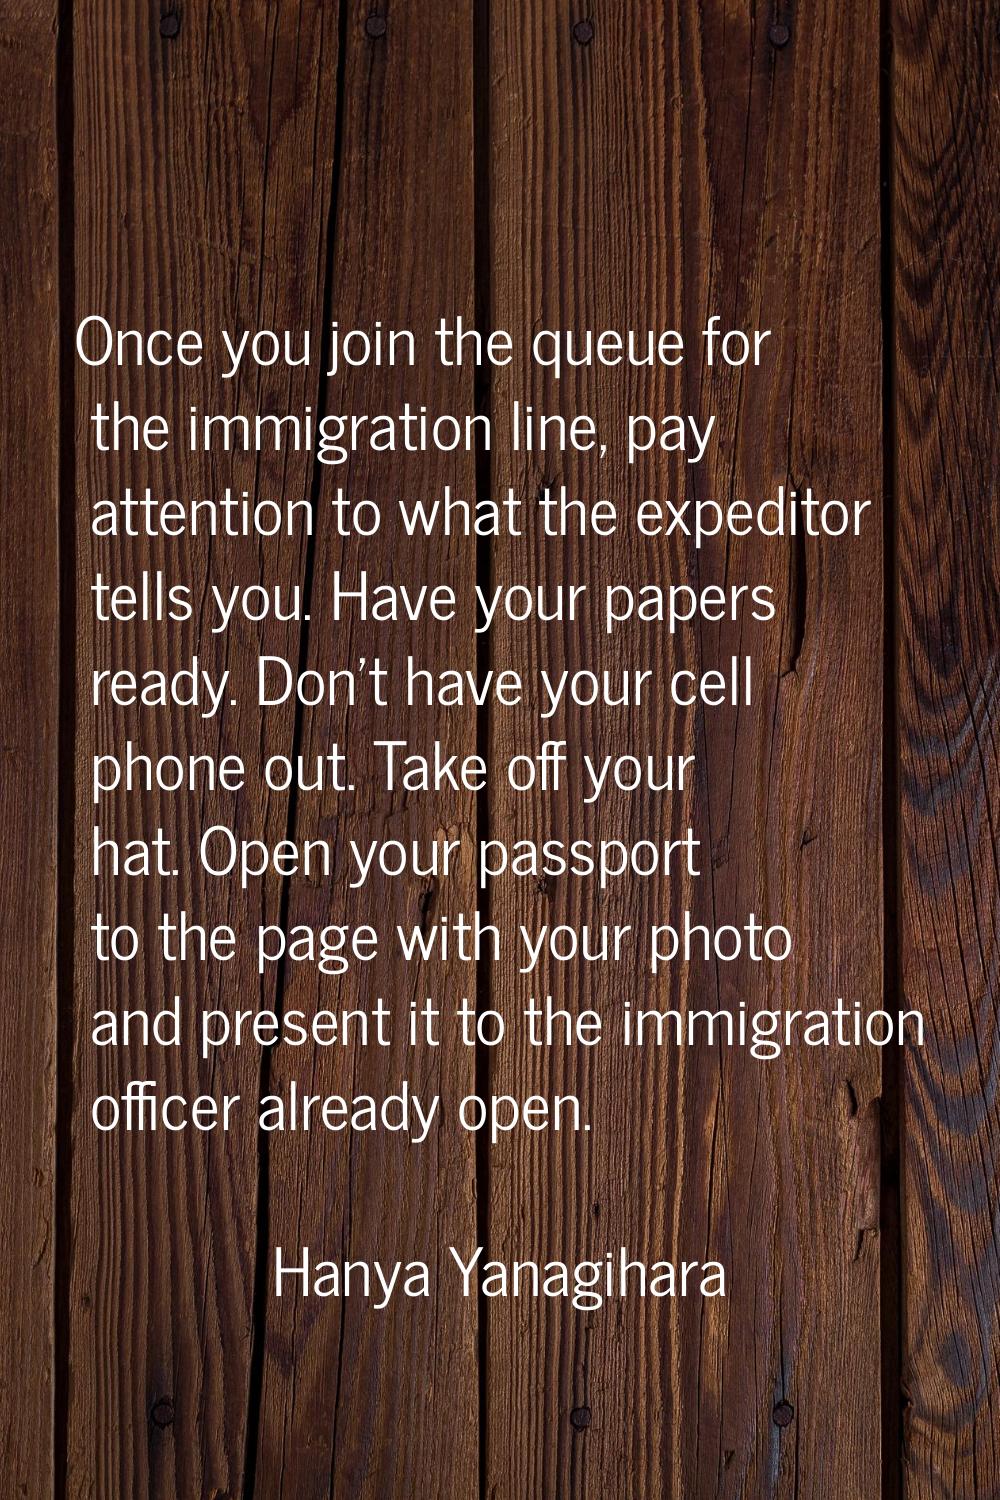 Once you join the queue for the immigration line, pay attention to what the expeditor tells you. Ha